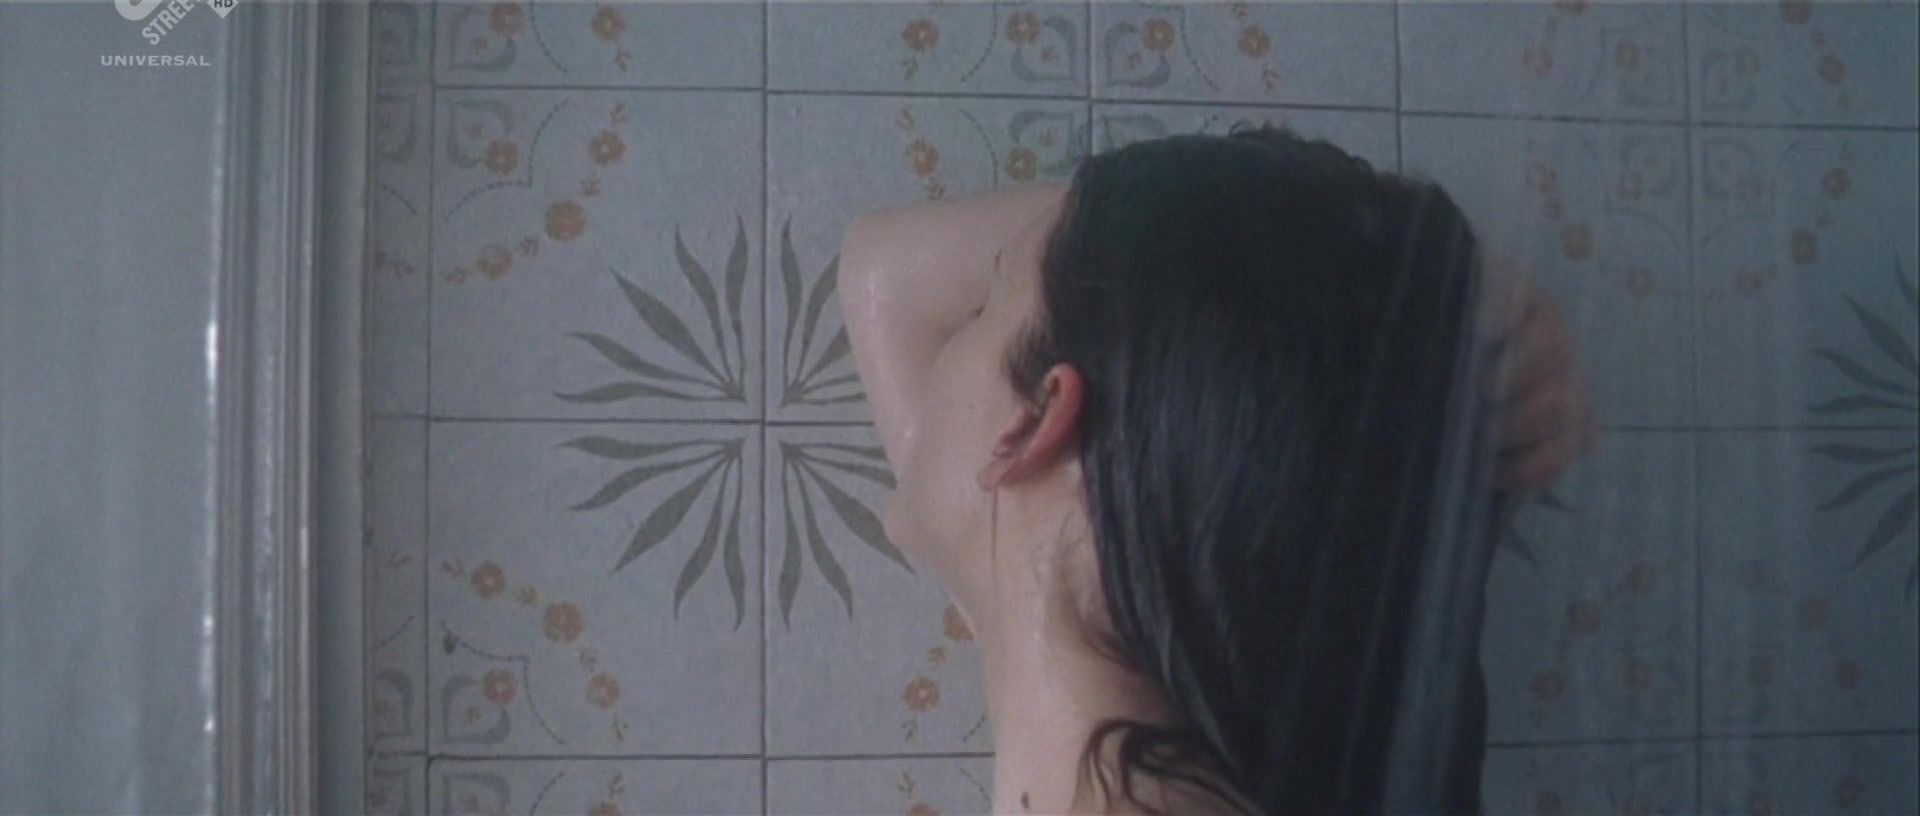 Corno Topless Melanie Laurent from Shower Video of the French movie "La chambre des morts" Camsex - 1